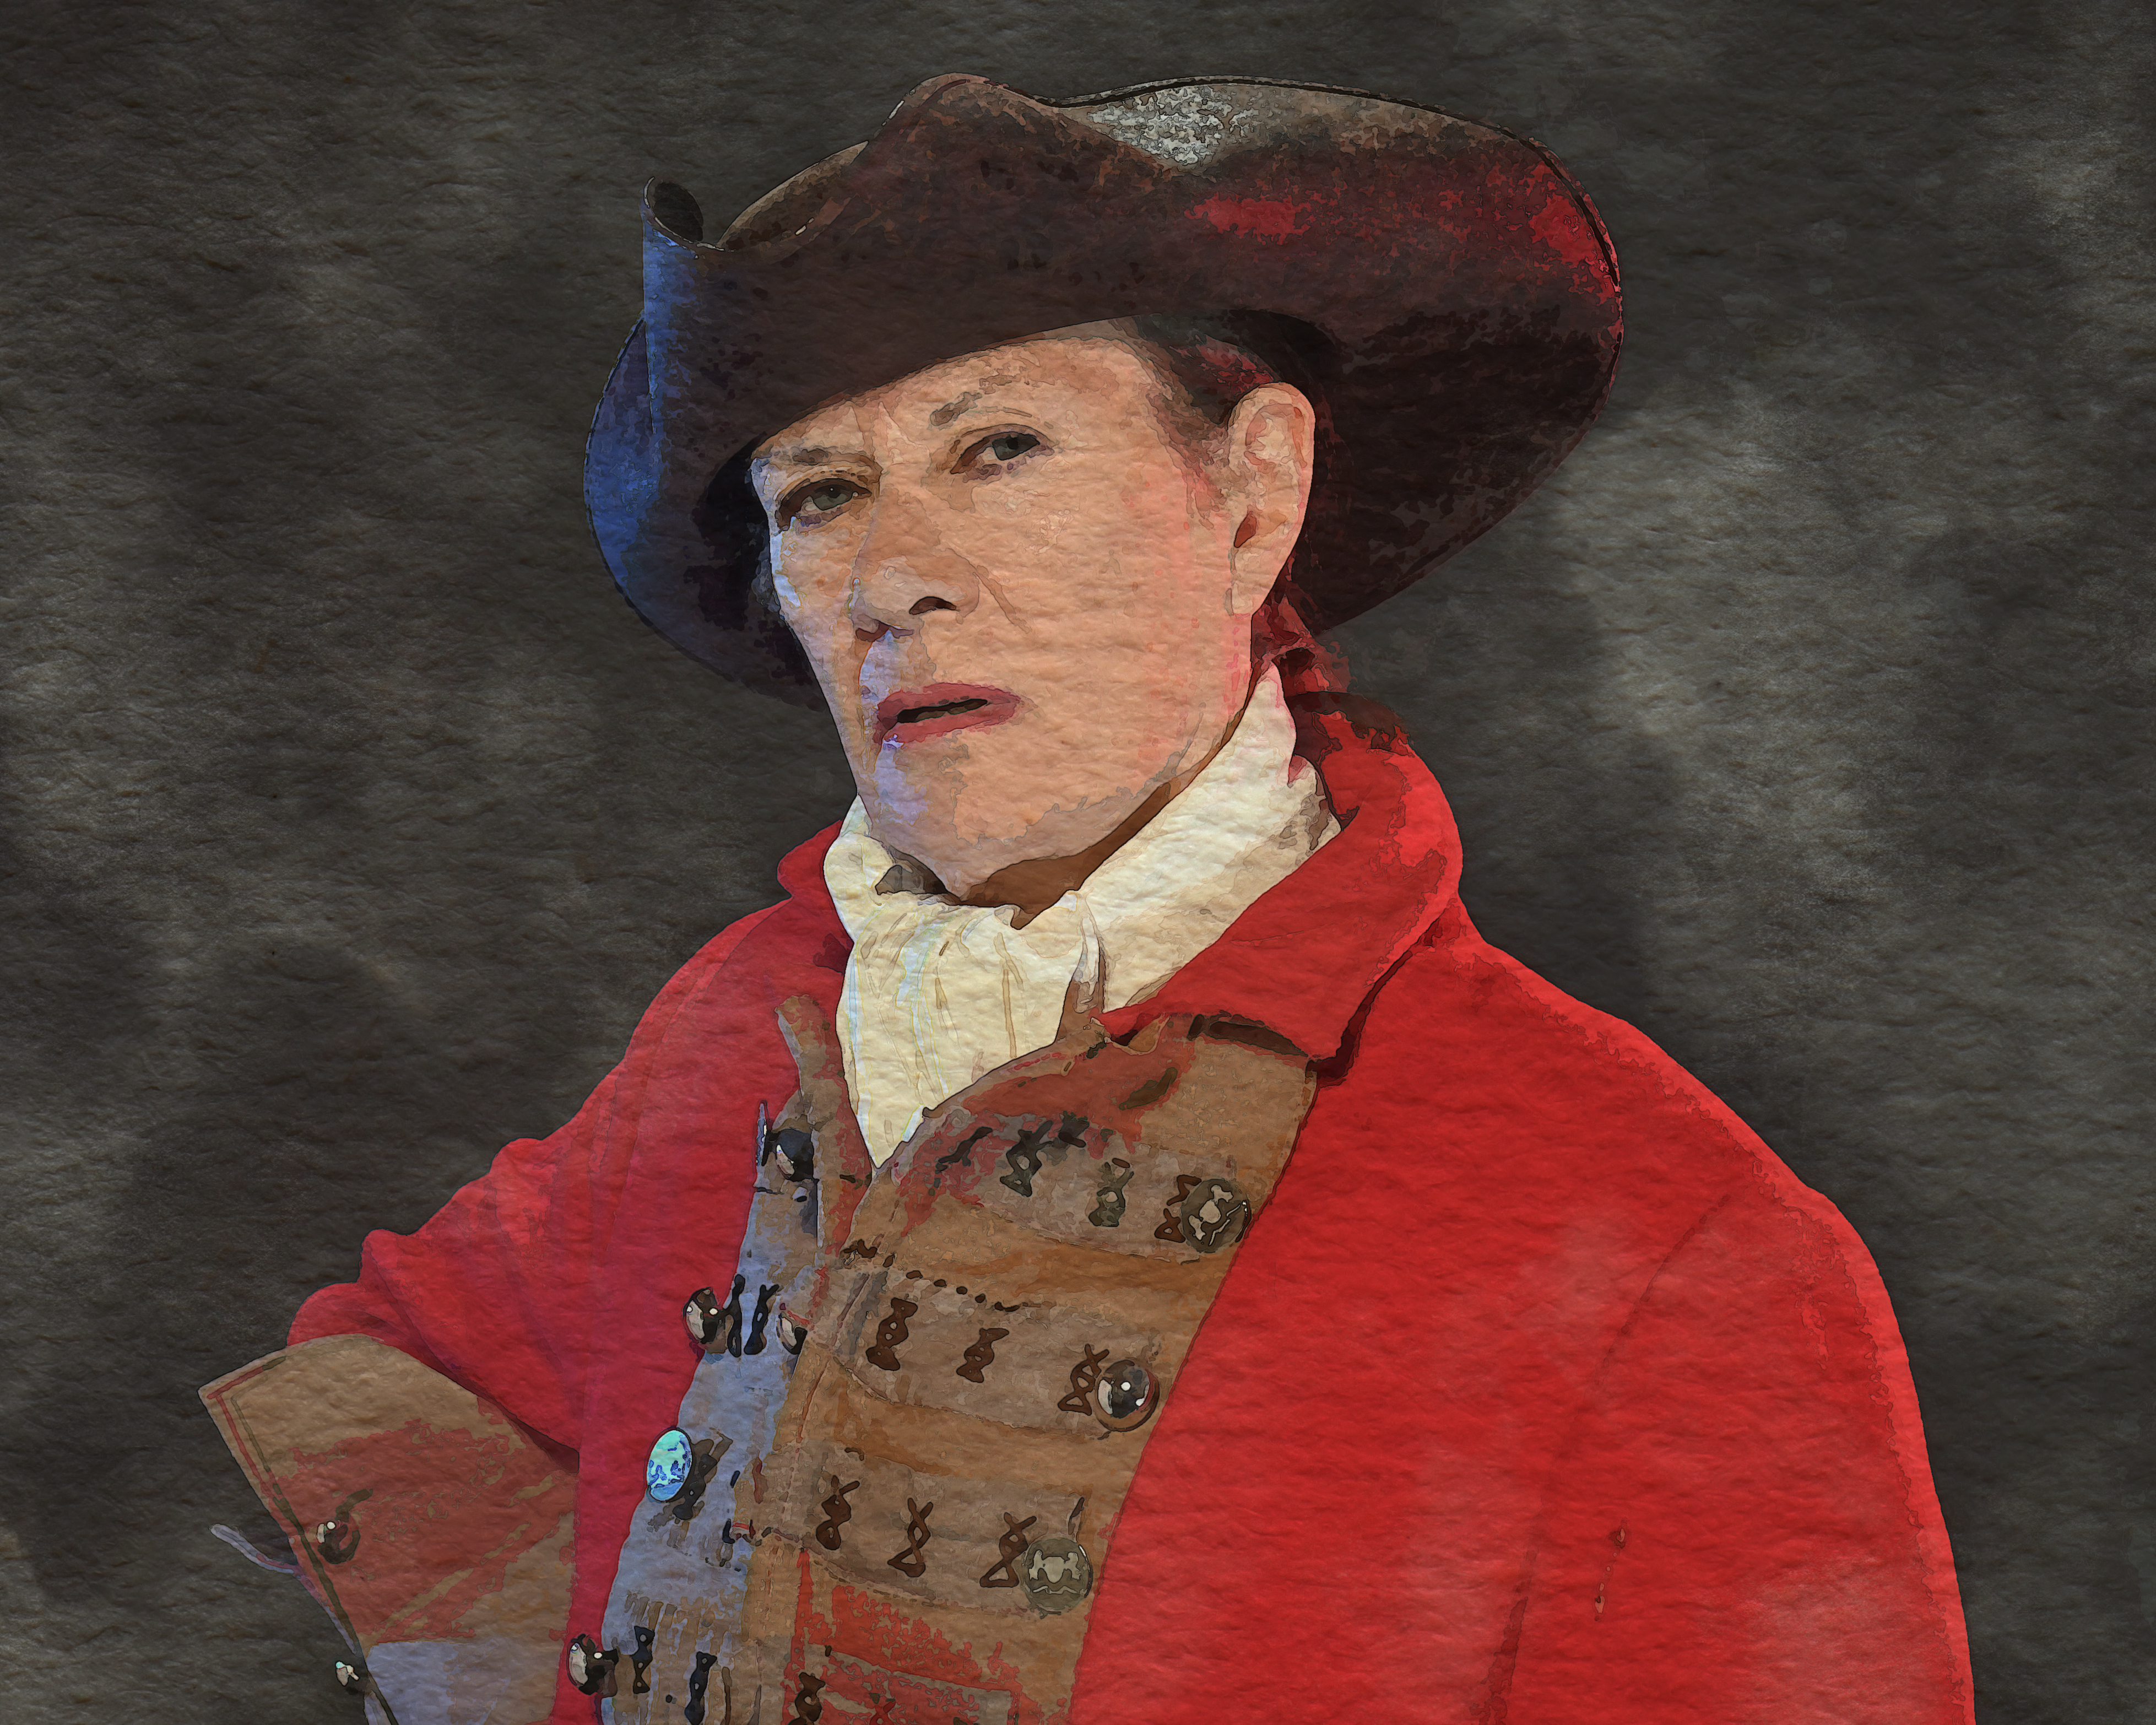 An image of Georgina Lock dressed in character of Hannah Snell, the female soldier. She is wearing a sailors hat and a bright red jacket.